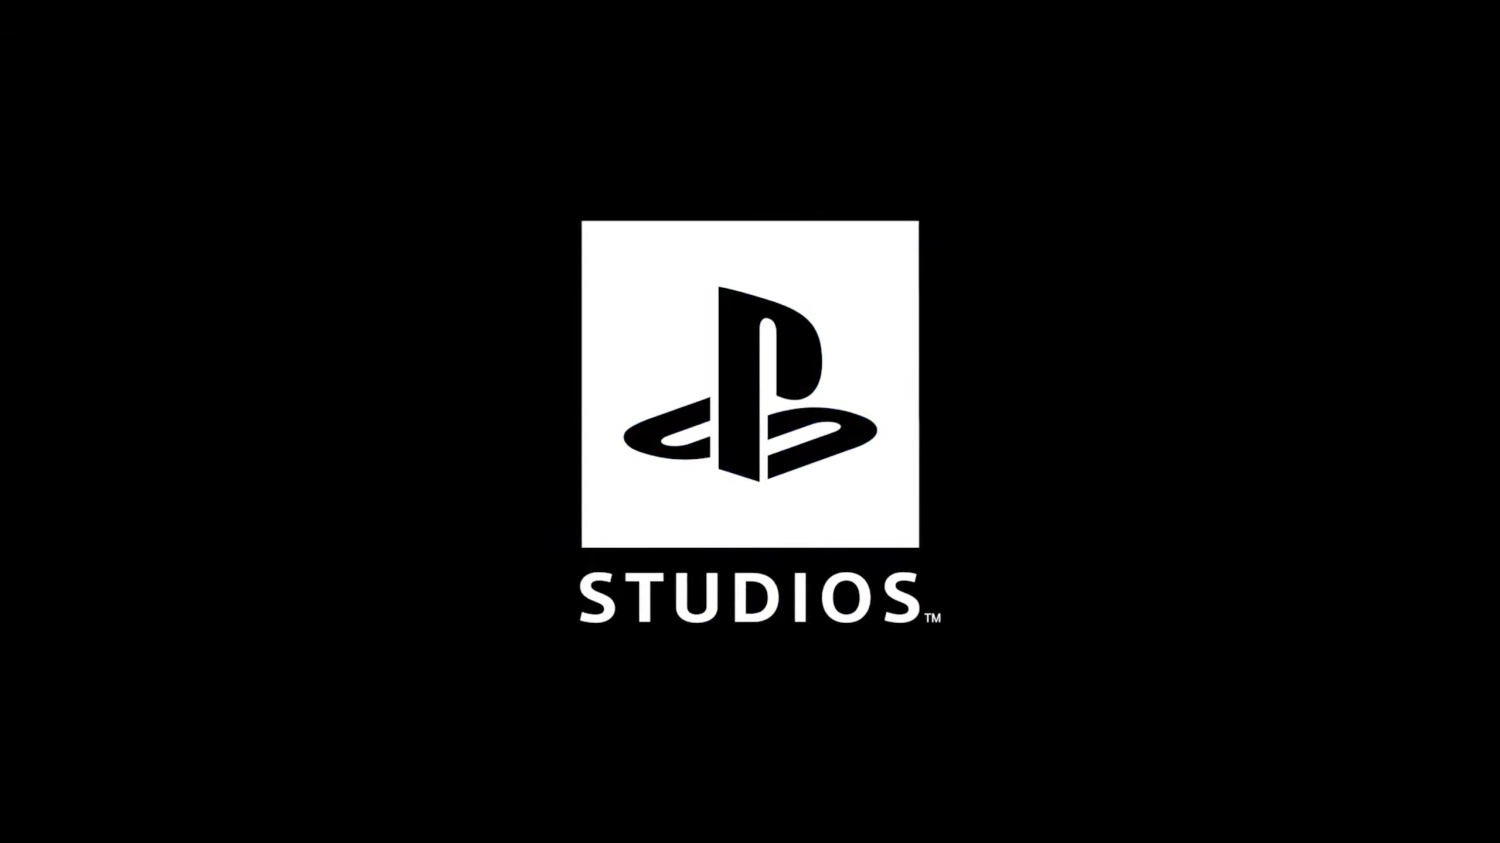 Sony expects to make $450 million on PC this year and significantly  increase investment in live service games